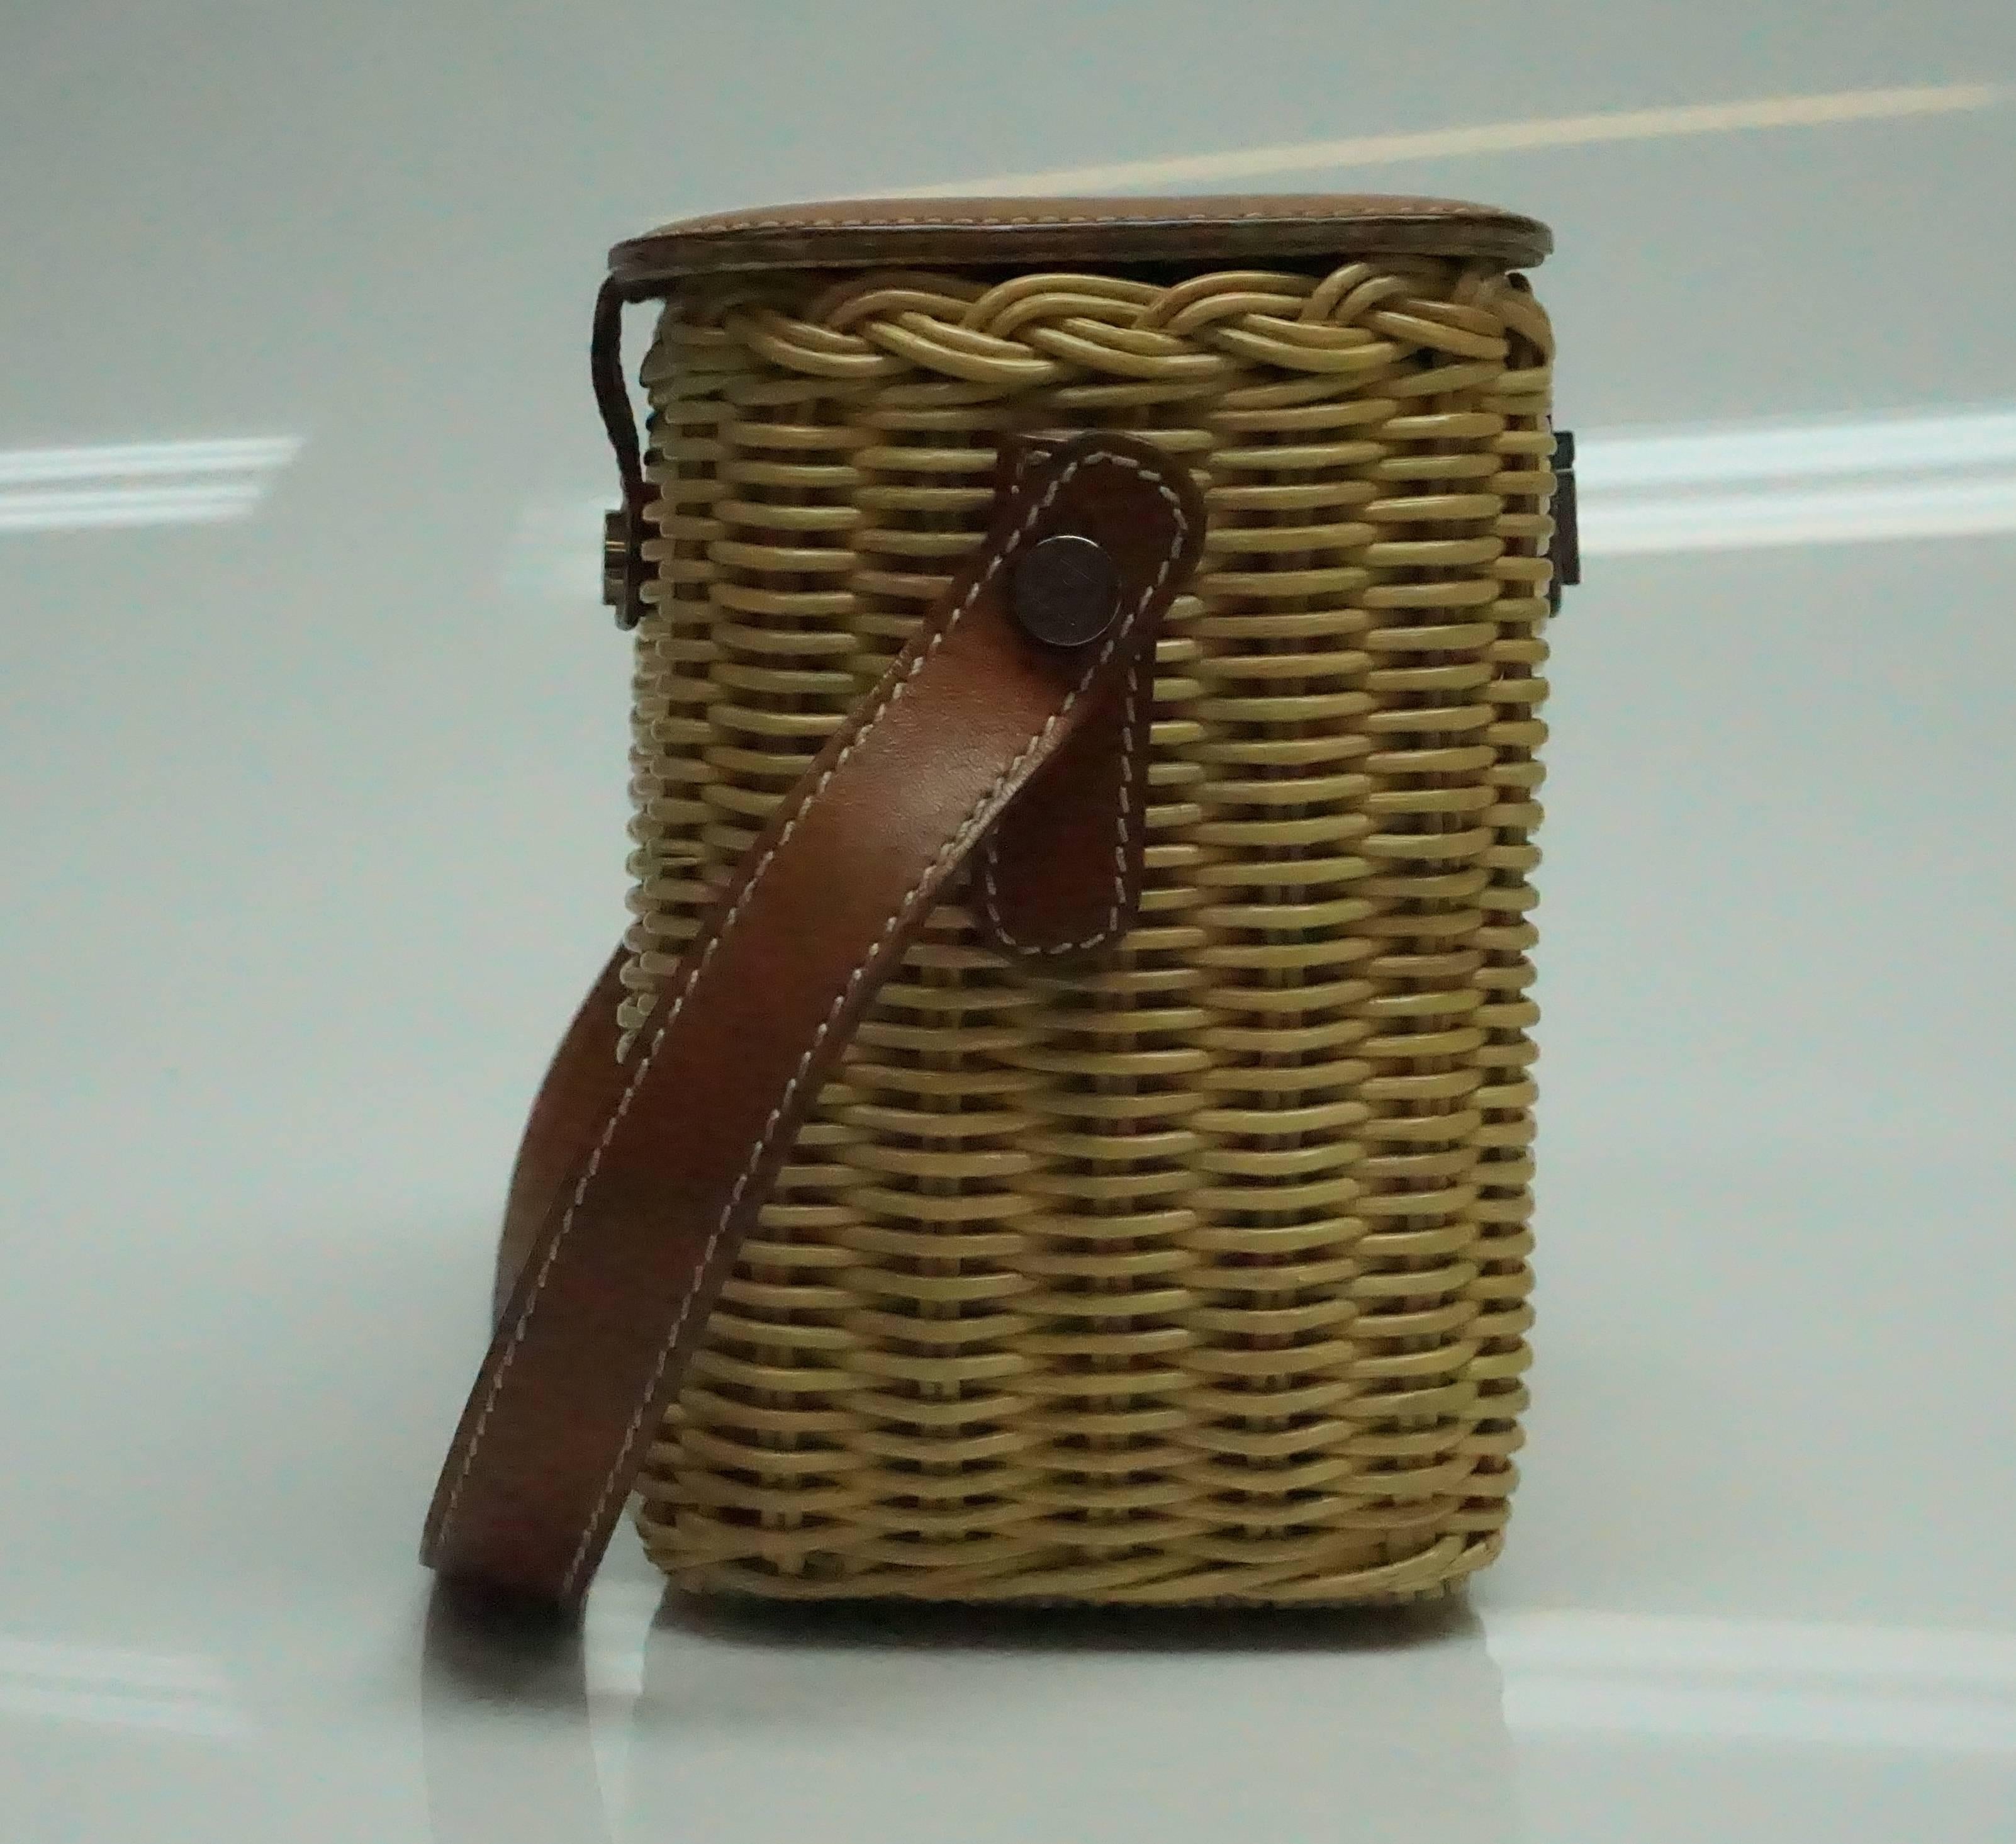 Lambertson Truex Wicker and Brown Leather Handbag. This adorable wicker bag by Lamberston Truex is in good condition. The inside material shows some fading and slight staining throughout and the silver hardware shows some scratches and scuffs. The